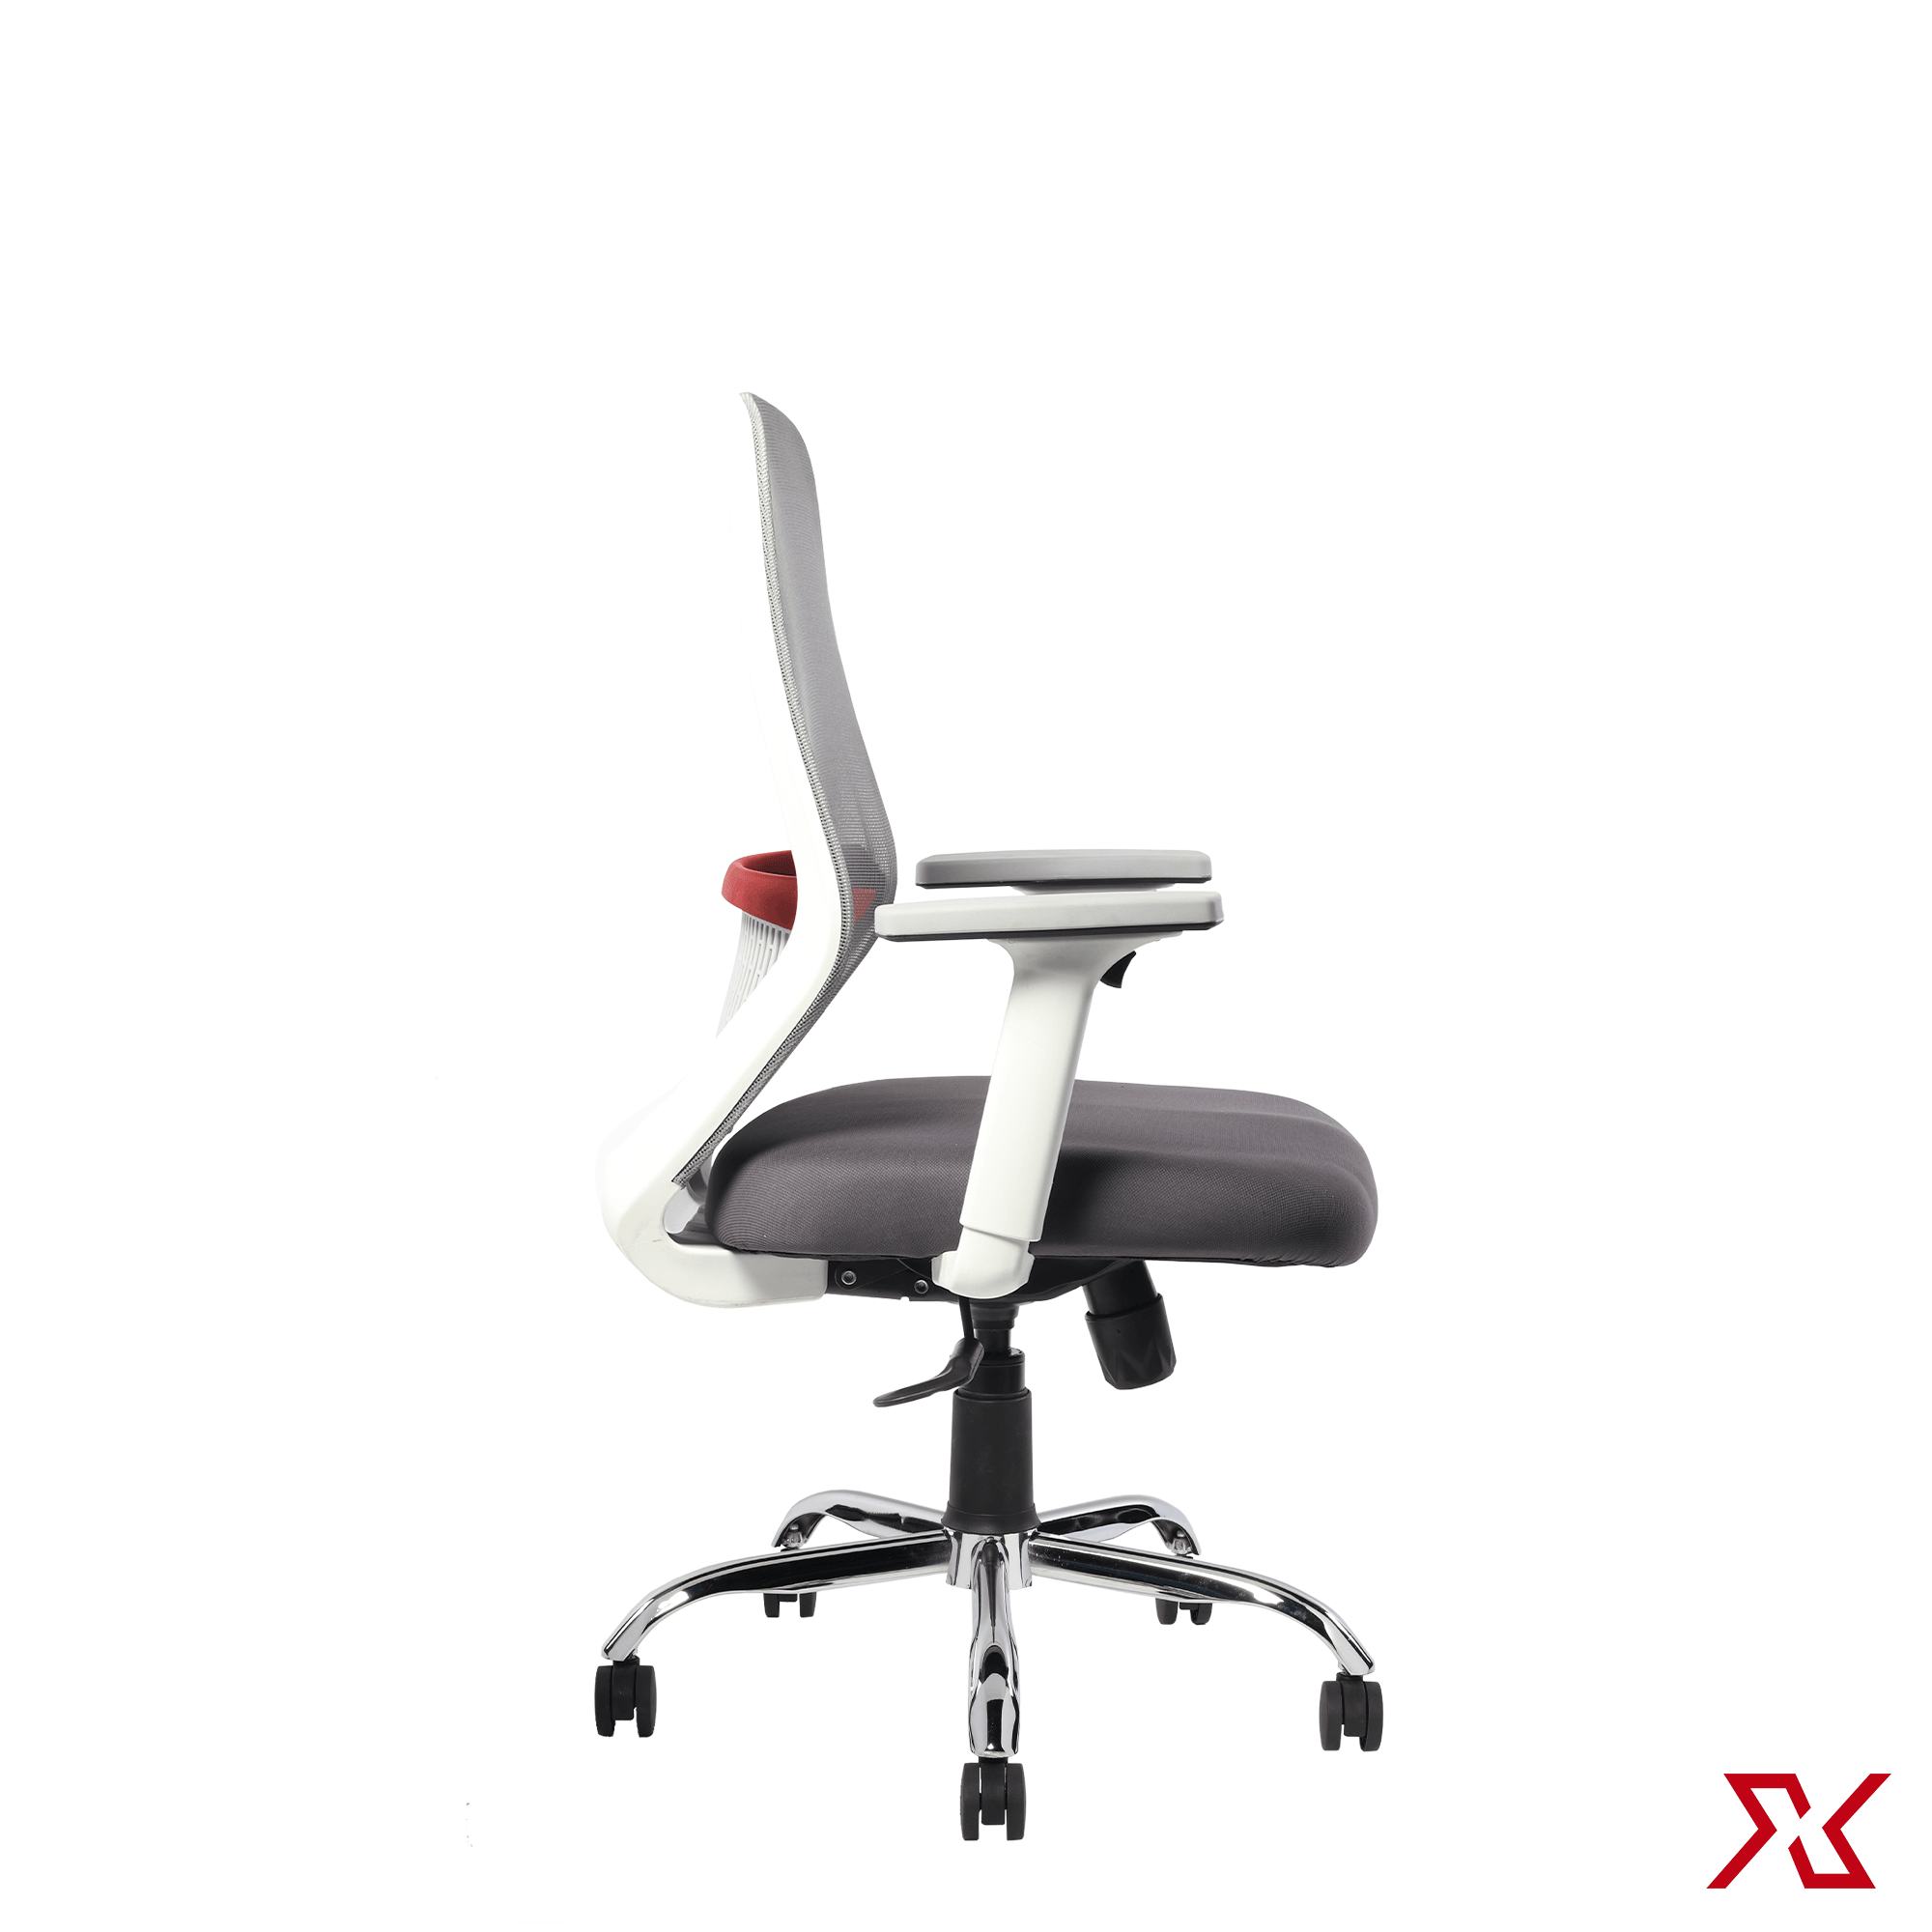 Zita Max - Exclusiff Seating Sytems